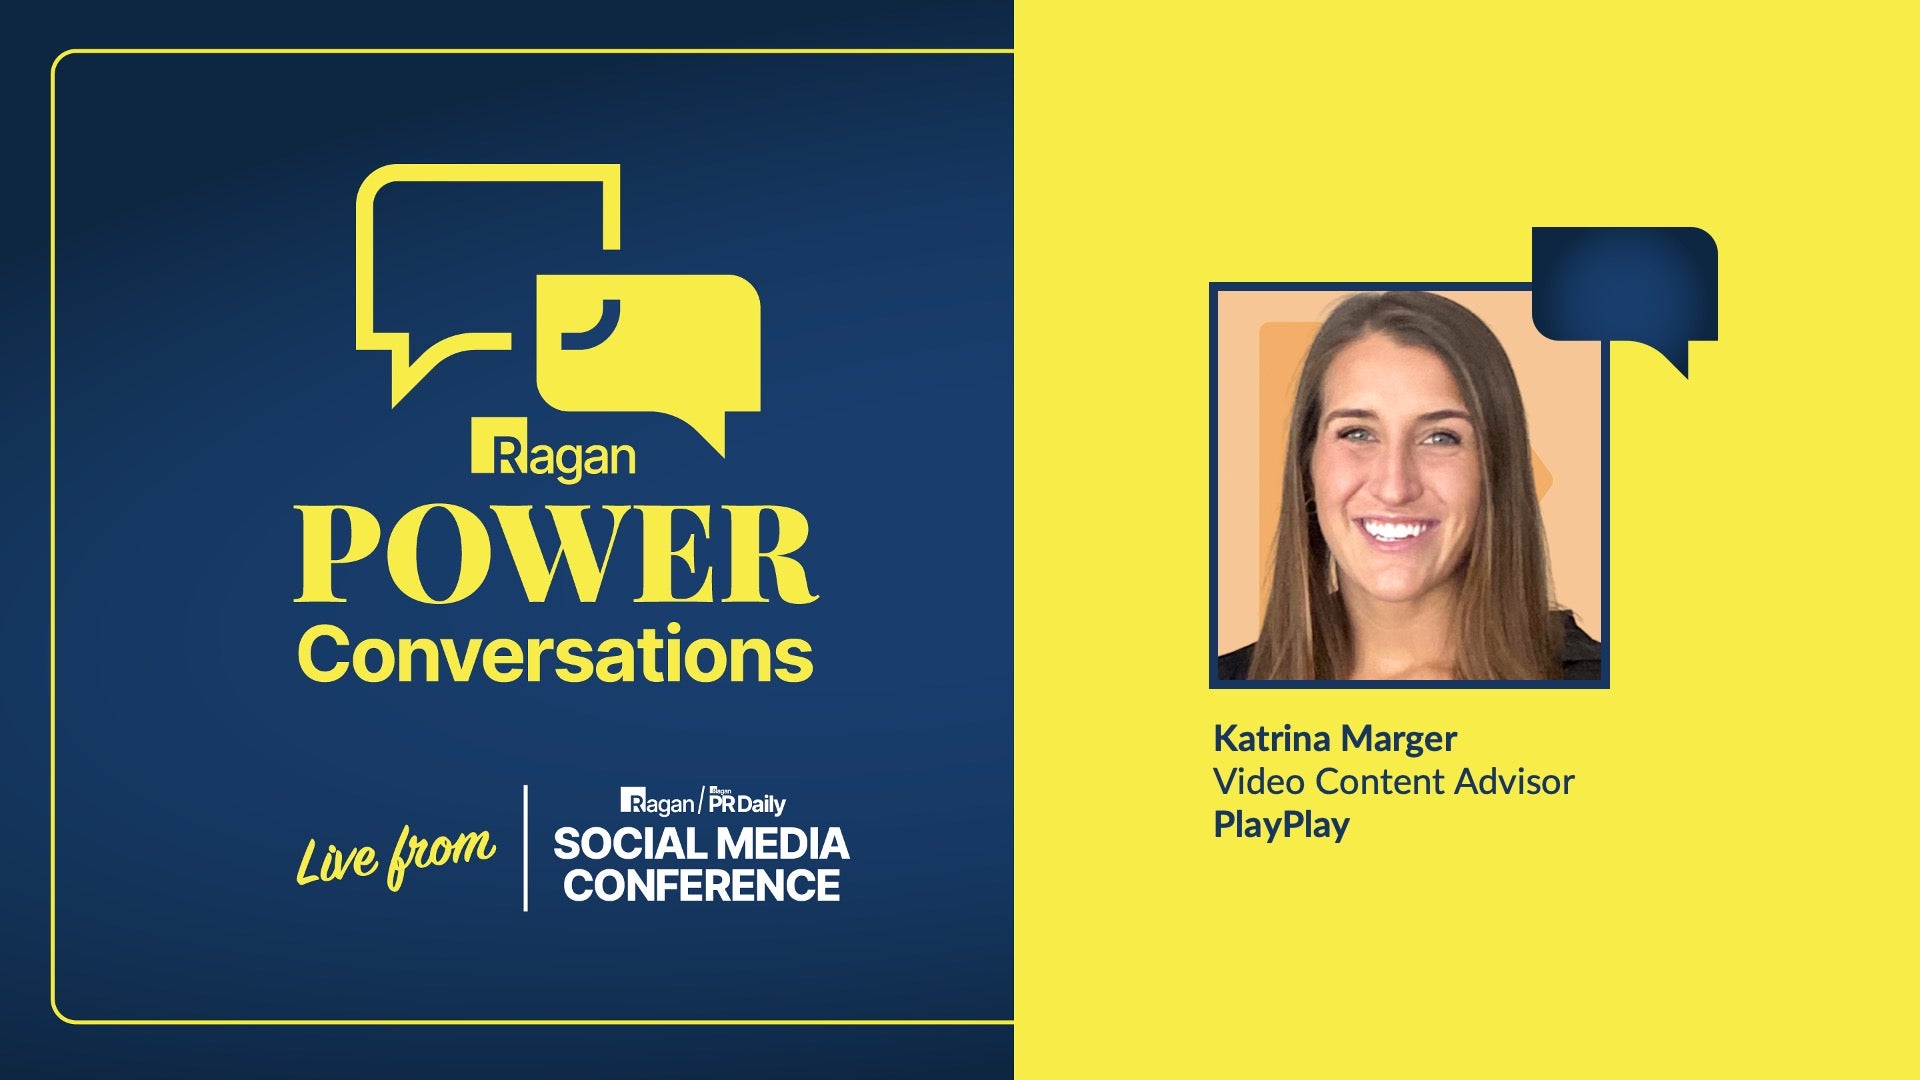 An image showing the headshot of katrina marger of PlayPlay, who spoke during a PR Daily Power Conversation